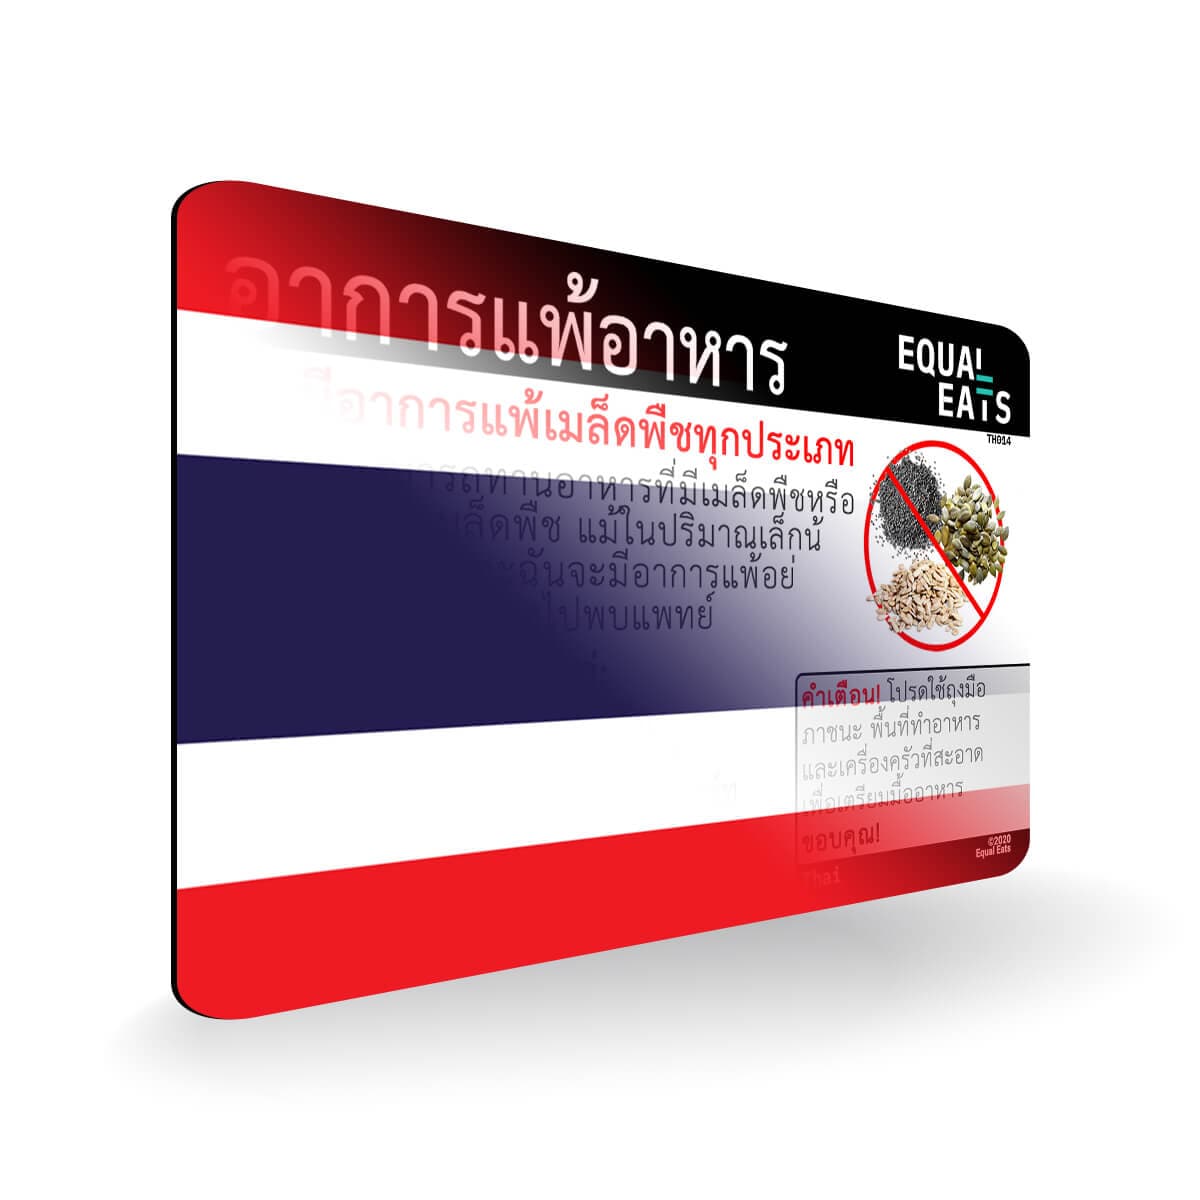 Seed Allergy in Thai. Seed Allergy Card for Thailand